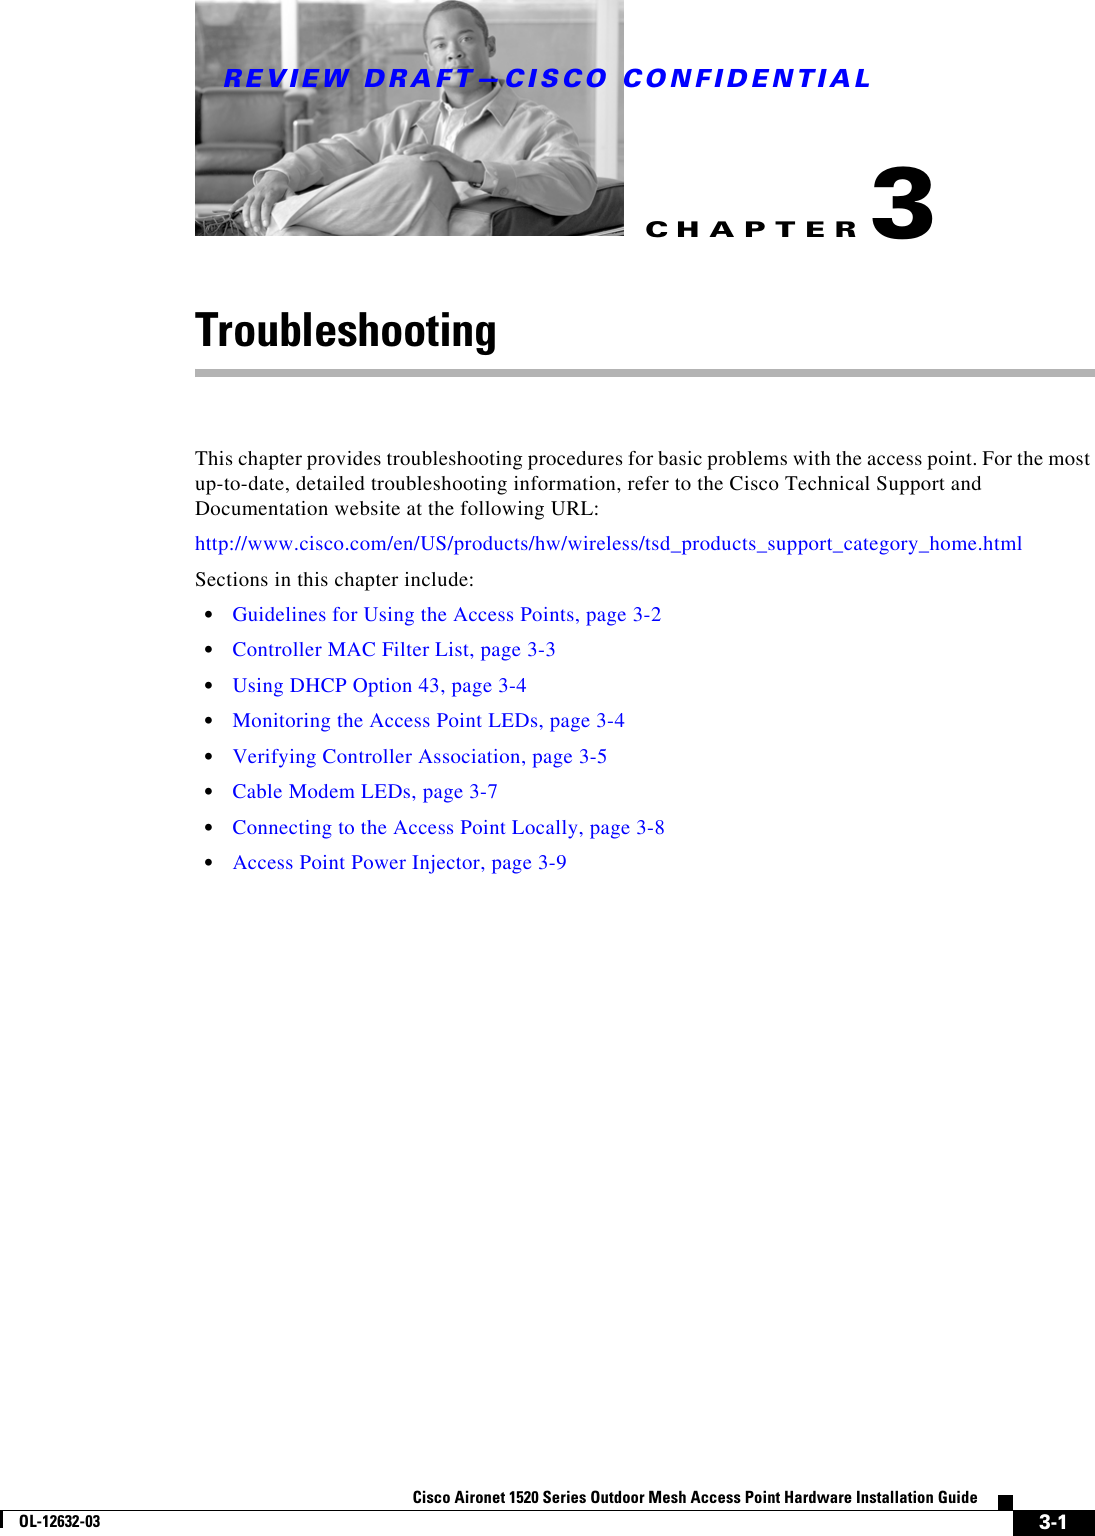 CHAPTERREVIEW DRAFT—CISCO CONFIDENTIAL3-1Cisco Aironet 1520 Series Outdoor Mesh Access Point Hardware Installation GuideOL-12632-033TroubleshootingThis chapter provides troubleshooting procedures for basic problems with the access point. For the most up-to-date, detailed troubleshooting information, refer to the Cisco Technical Support and Documentation website at the following URL:http://www.cisco.com/en/US/products/hw/wireless/tsd_products_support_category_home.htmlSections in this chapter include:  • Guidelines for Using the Access Points, page 3-2  • Controller MAC Filter List, page 3-3  • Using DHCP Option 43, page 3-4  • Monitoring the Access Point LEDs, page 3-4  • Verifying Controller Association, page 3-5  • Cable Modem LEDs, page 3-7  • Connecting to the Access Point Locally, page 3-8  • Access Point Power Injector, page 3-9